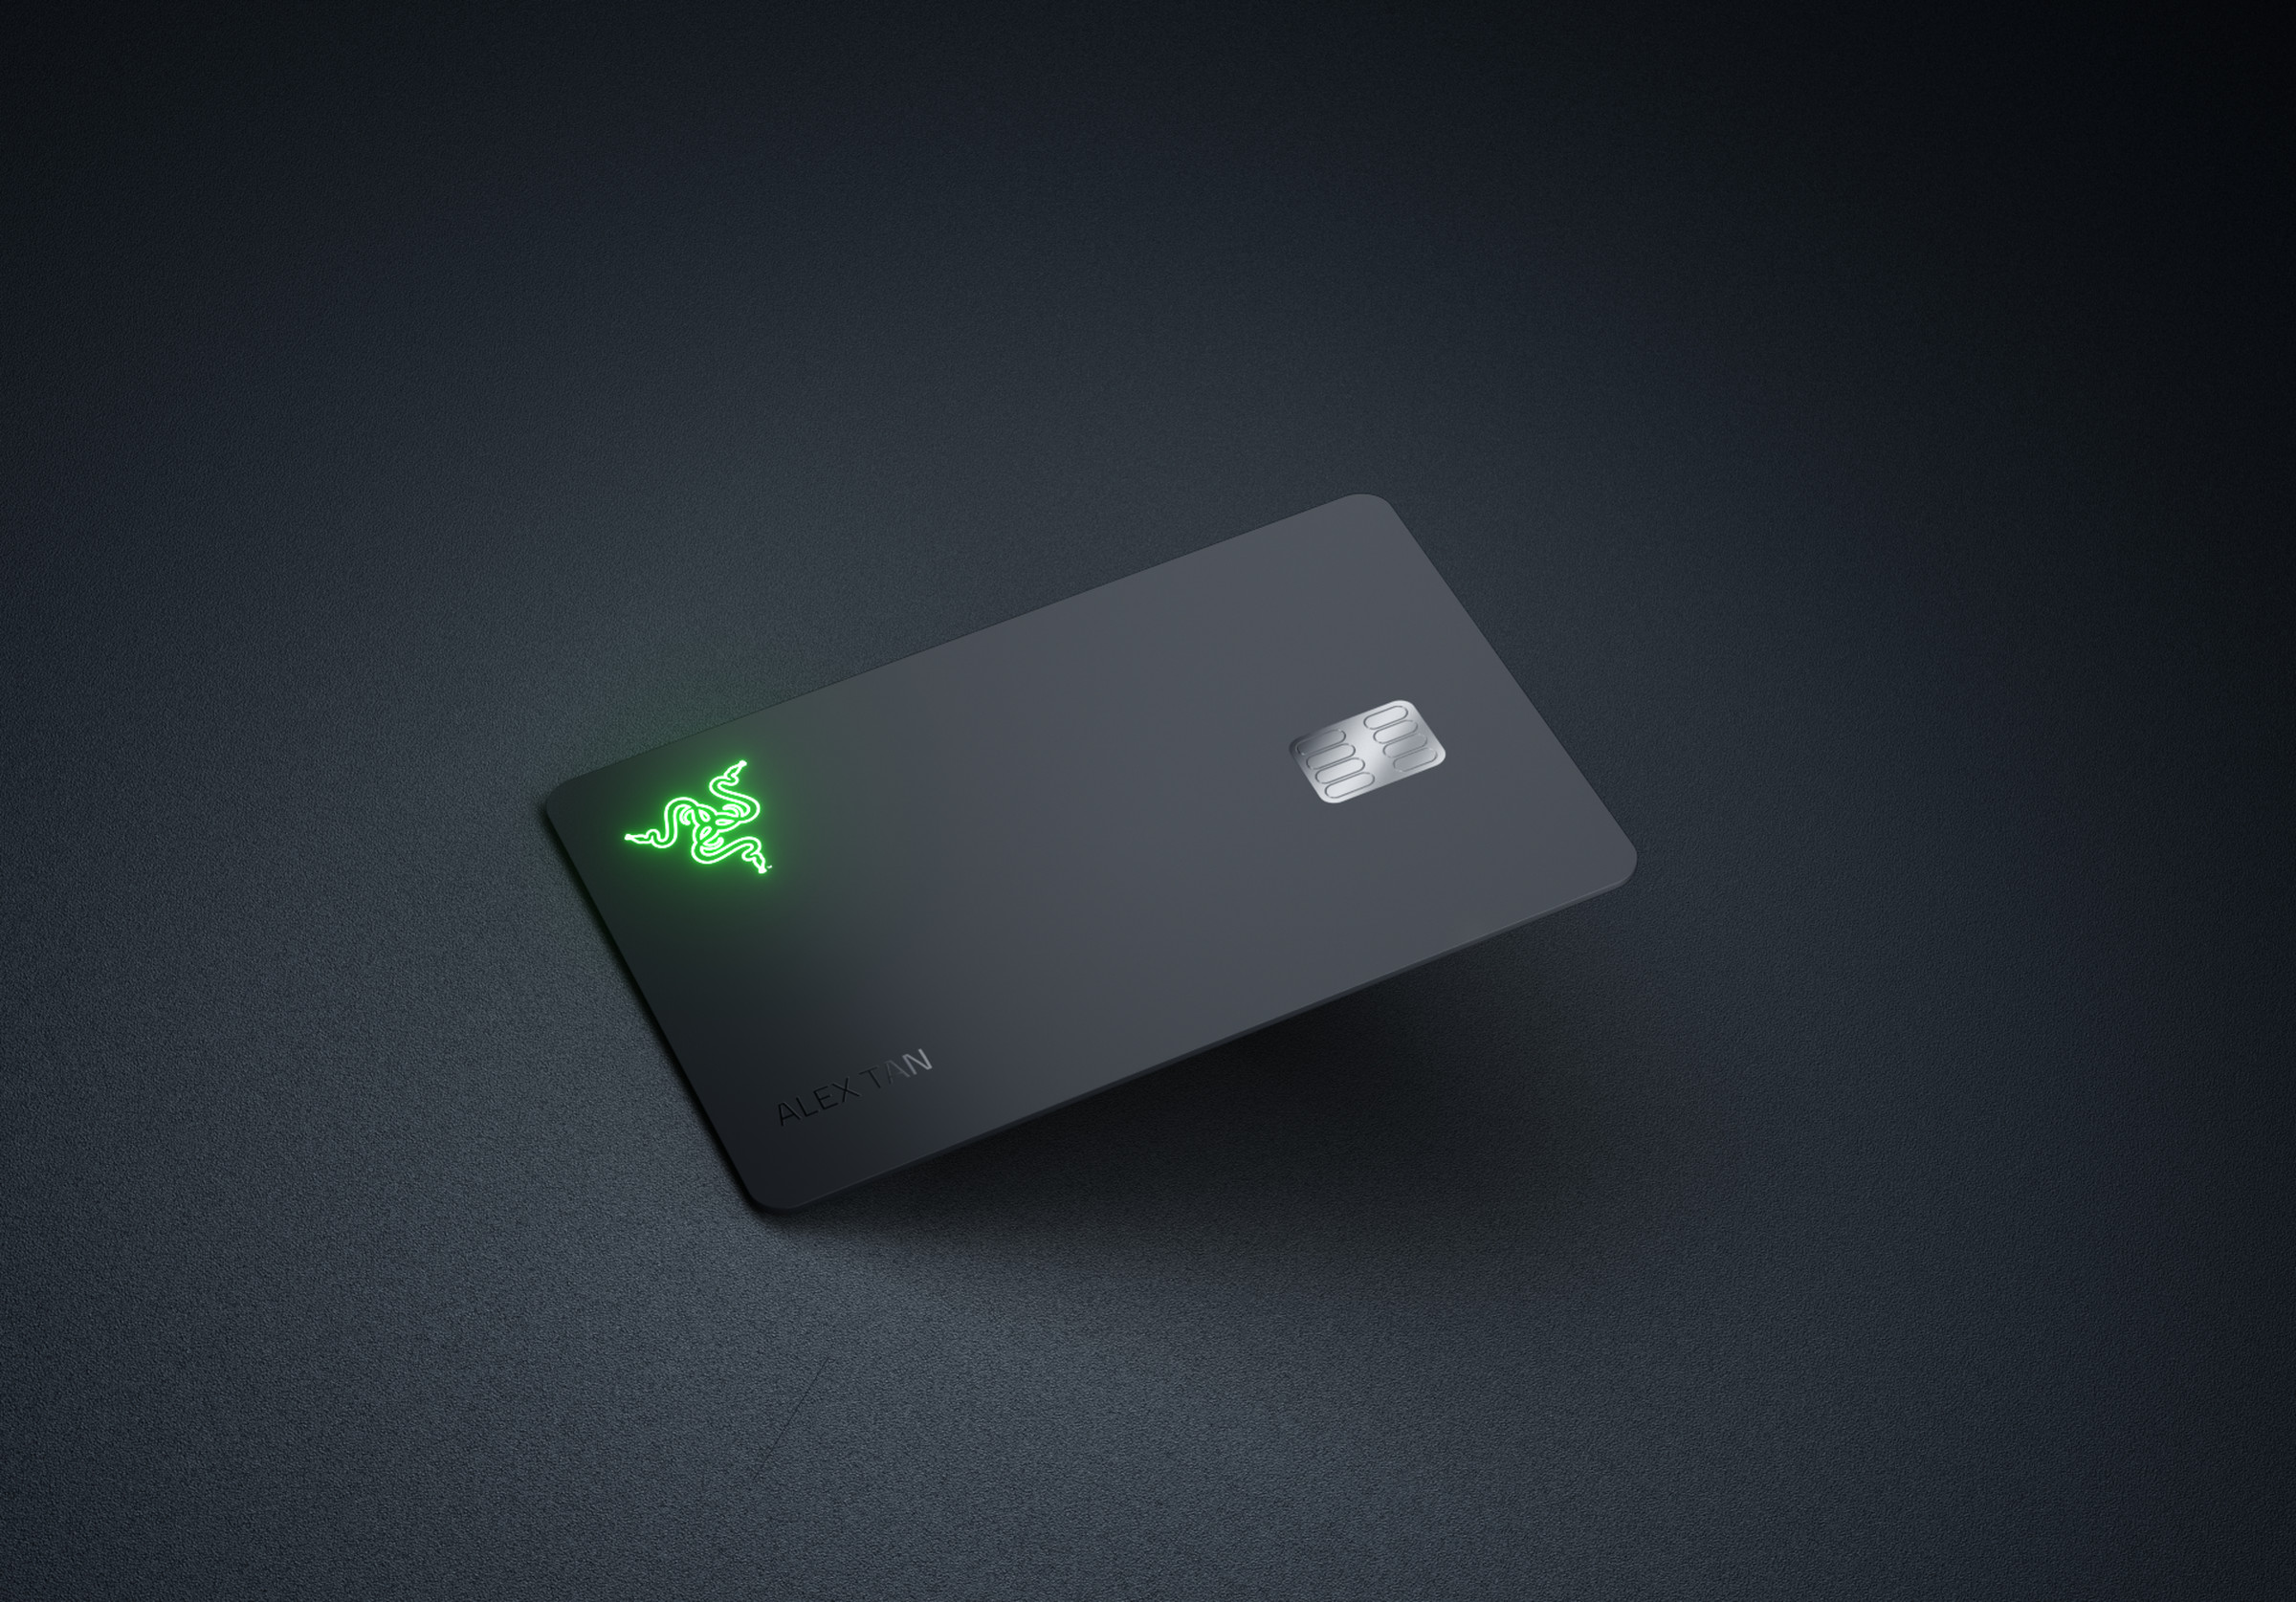 Imagine if that little Razer logo glowed with RBG lighting after every contactless payment, though.